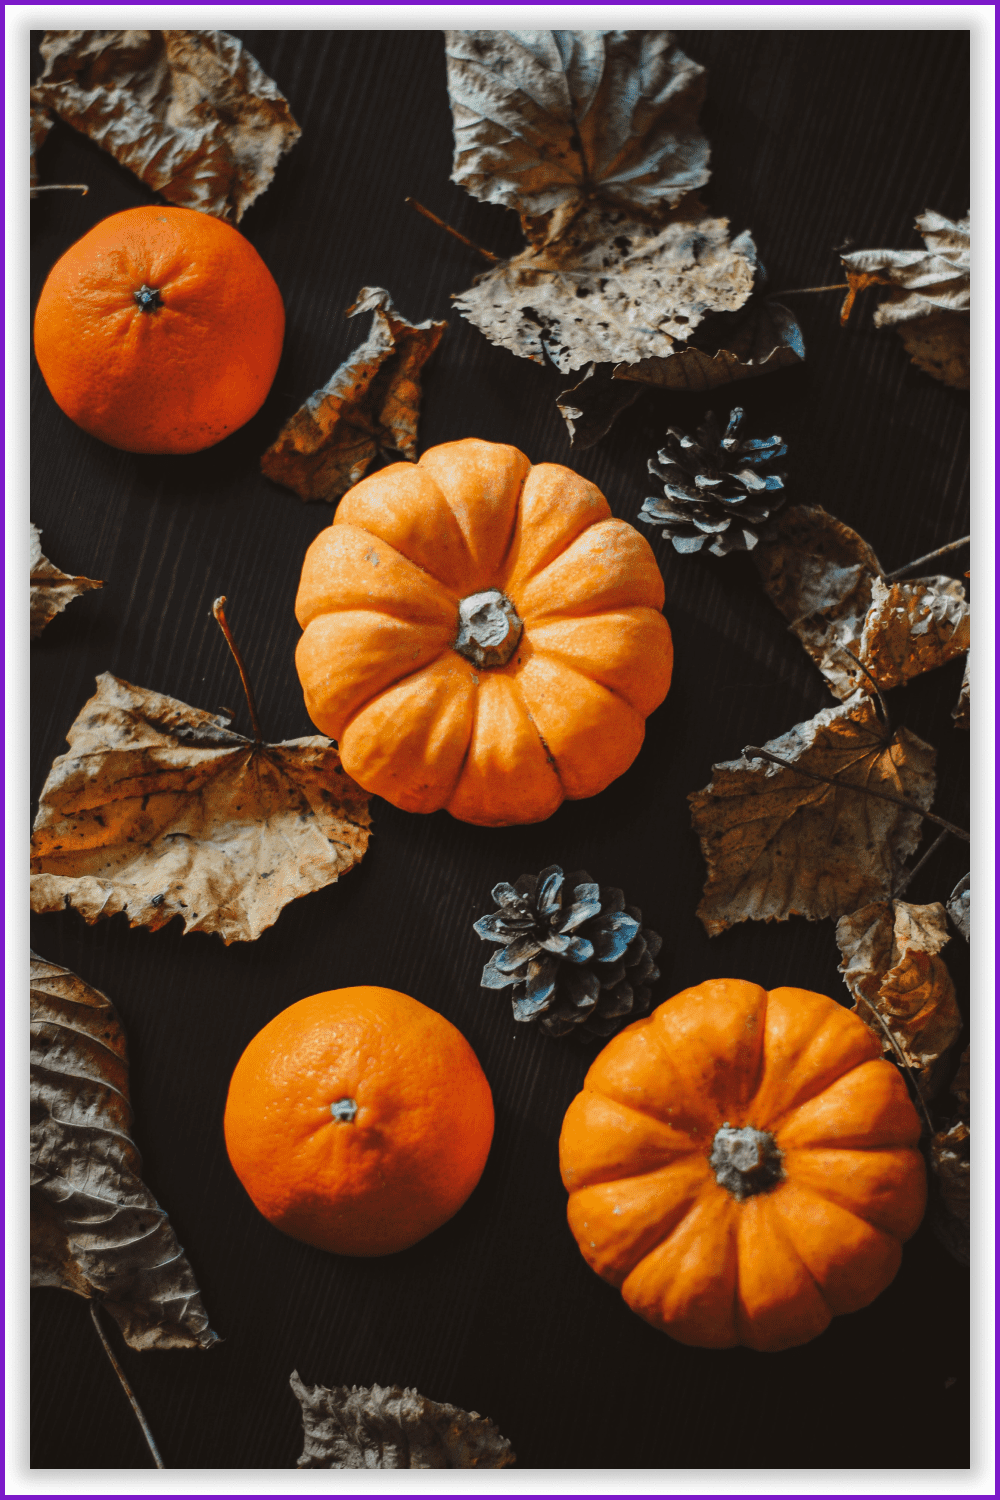 Photo of orange pumpkins and tangerine with leaves and cones on the table.